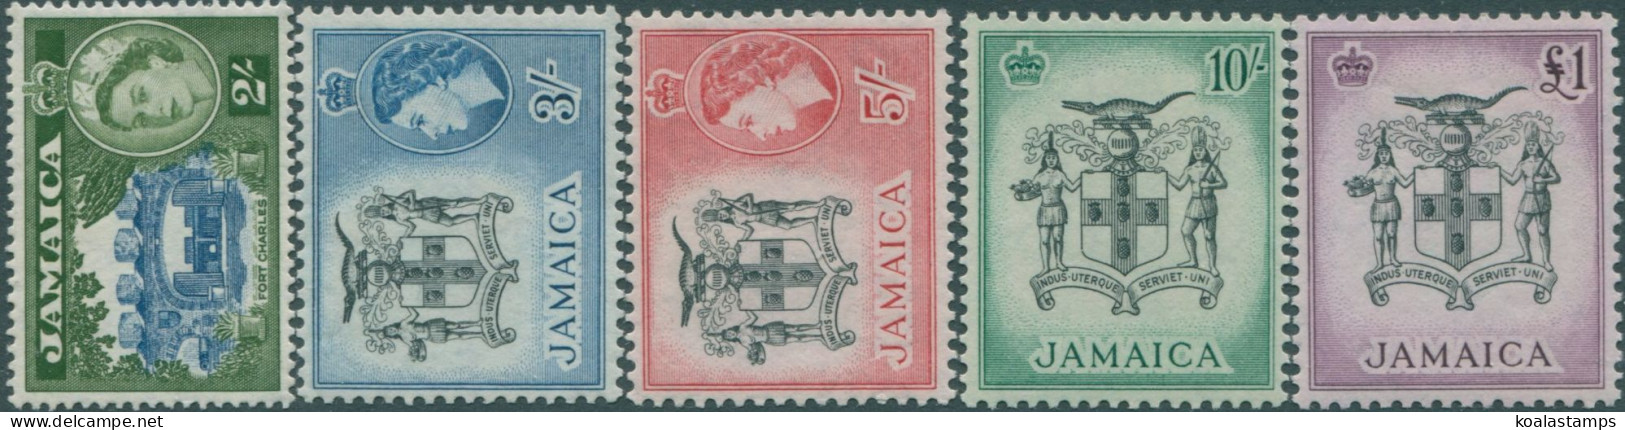 Jamaica 1956 SG170-174 QEII Fort Charles And Arms MLH - Jamaica (1962-...)